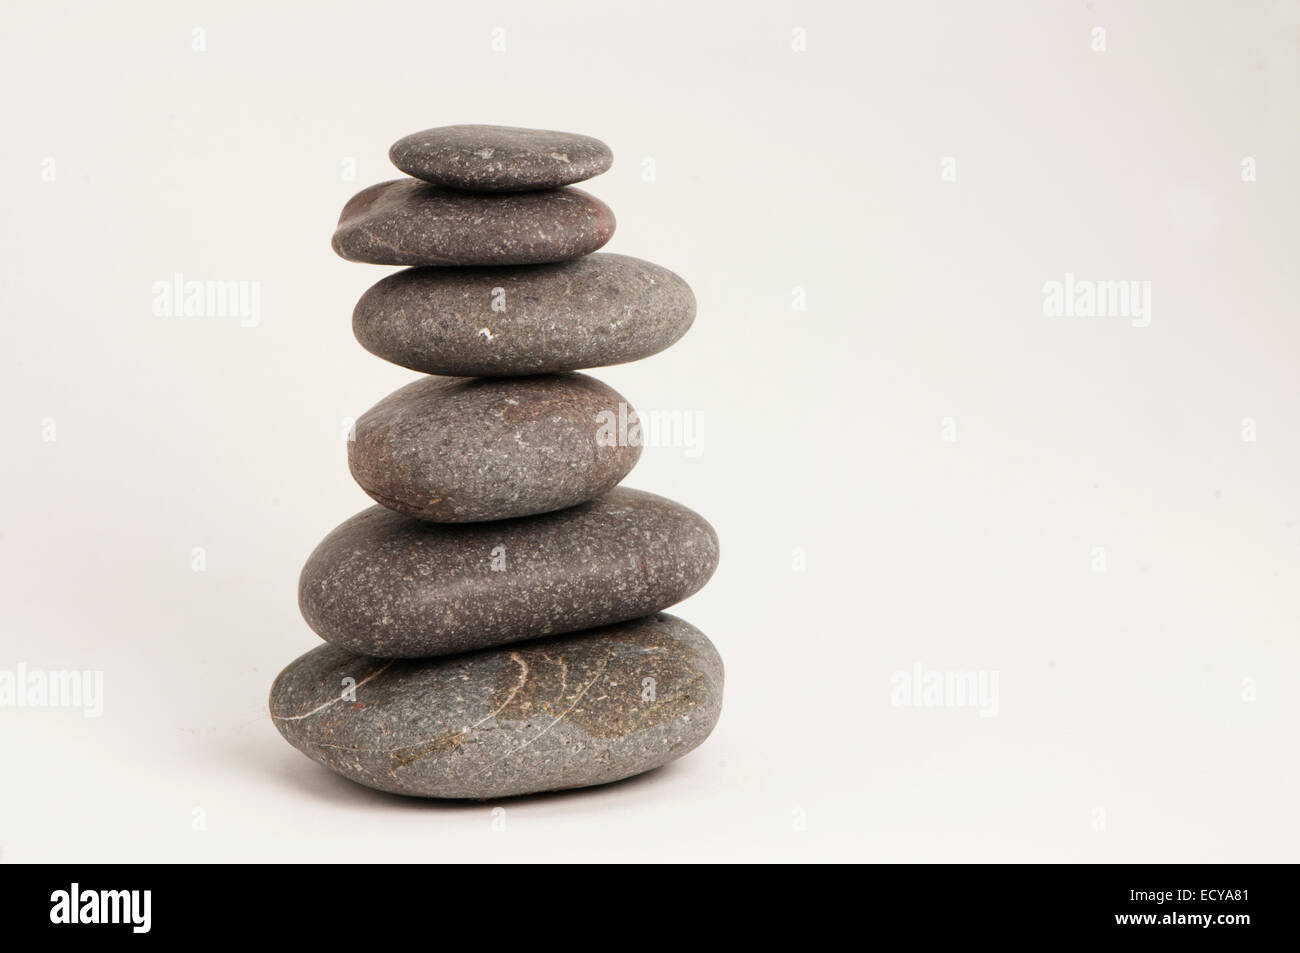 Balancing rounded pebbles. Stock Photo